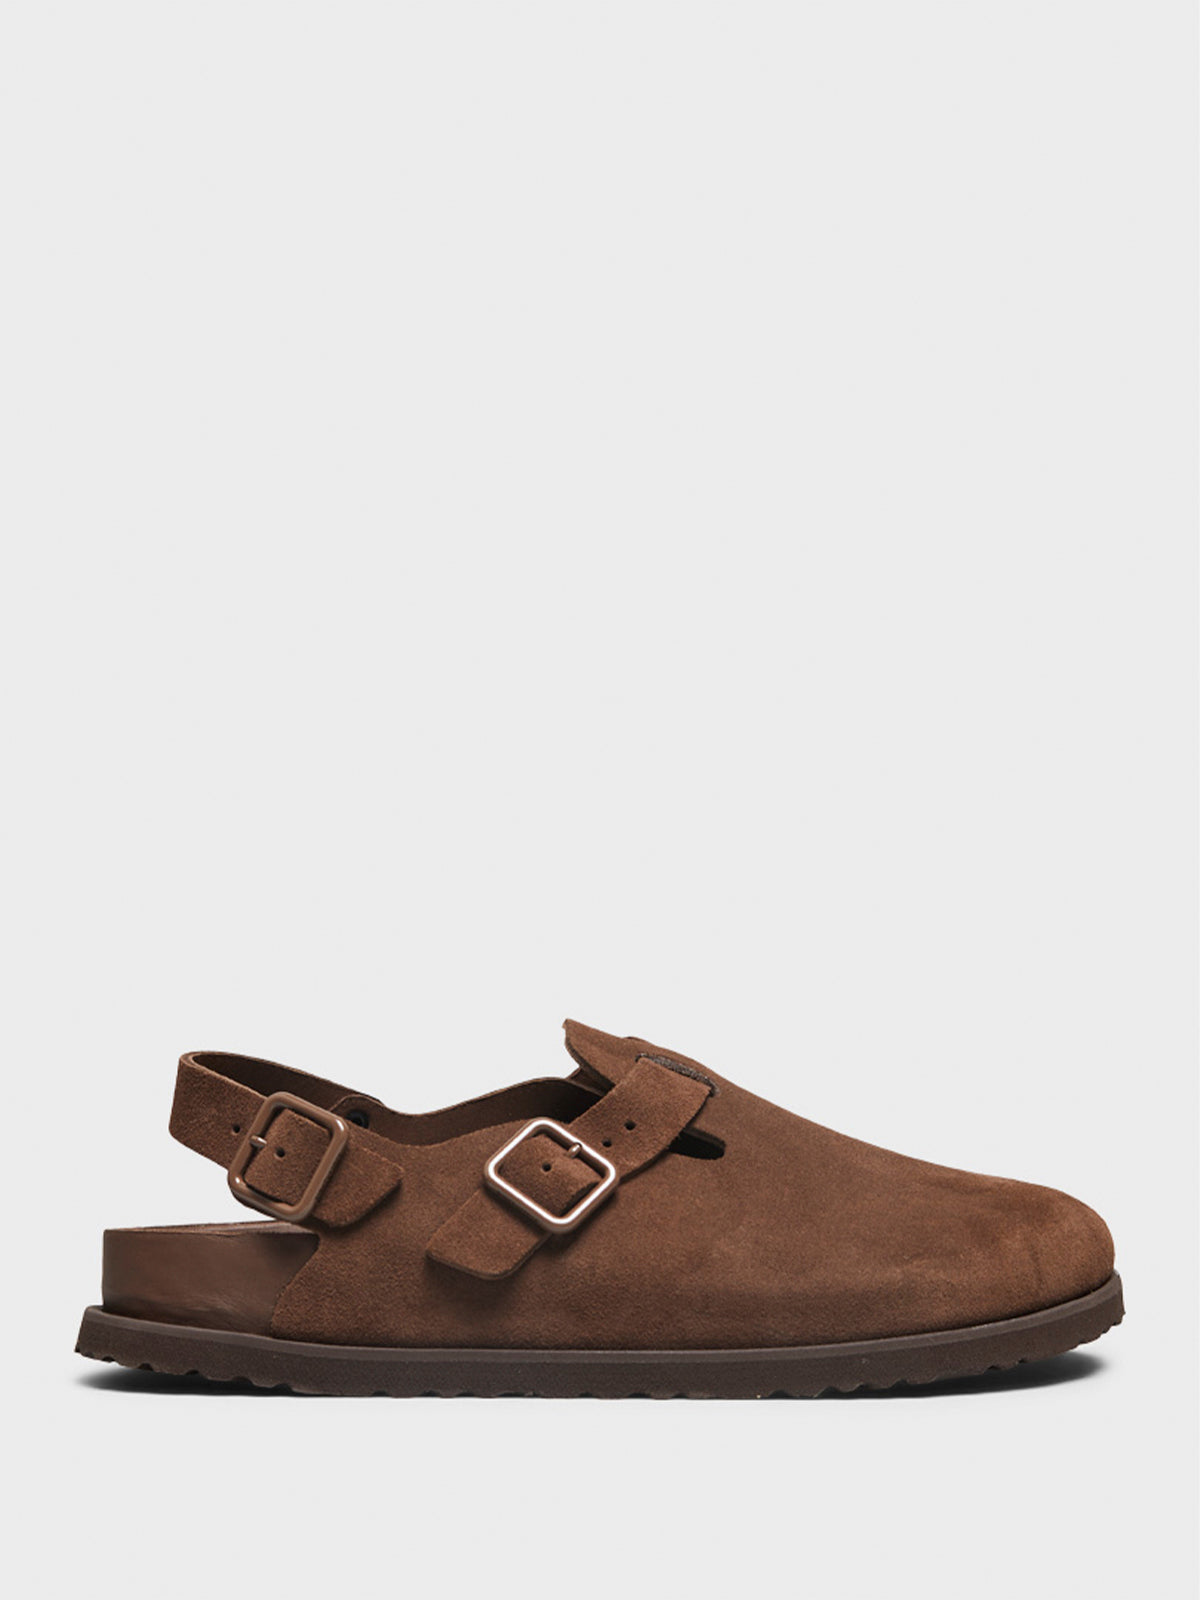 1774 - Tokio Cazador Leather Sandals in Brown